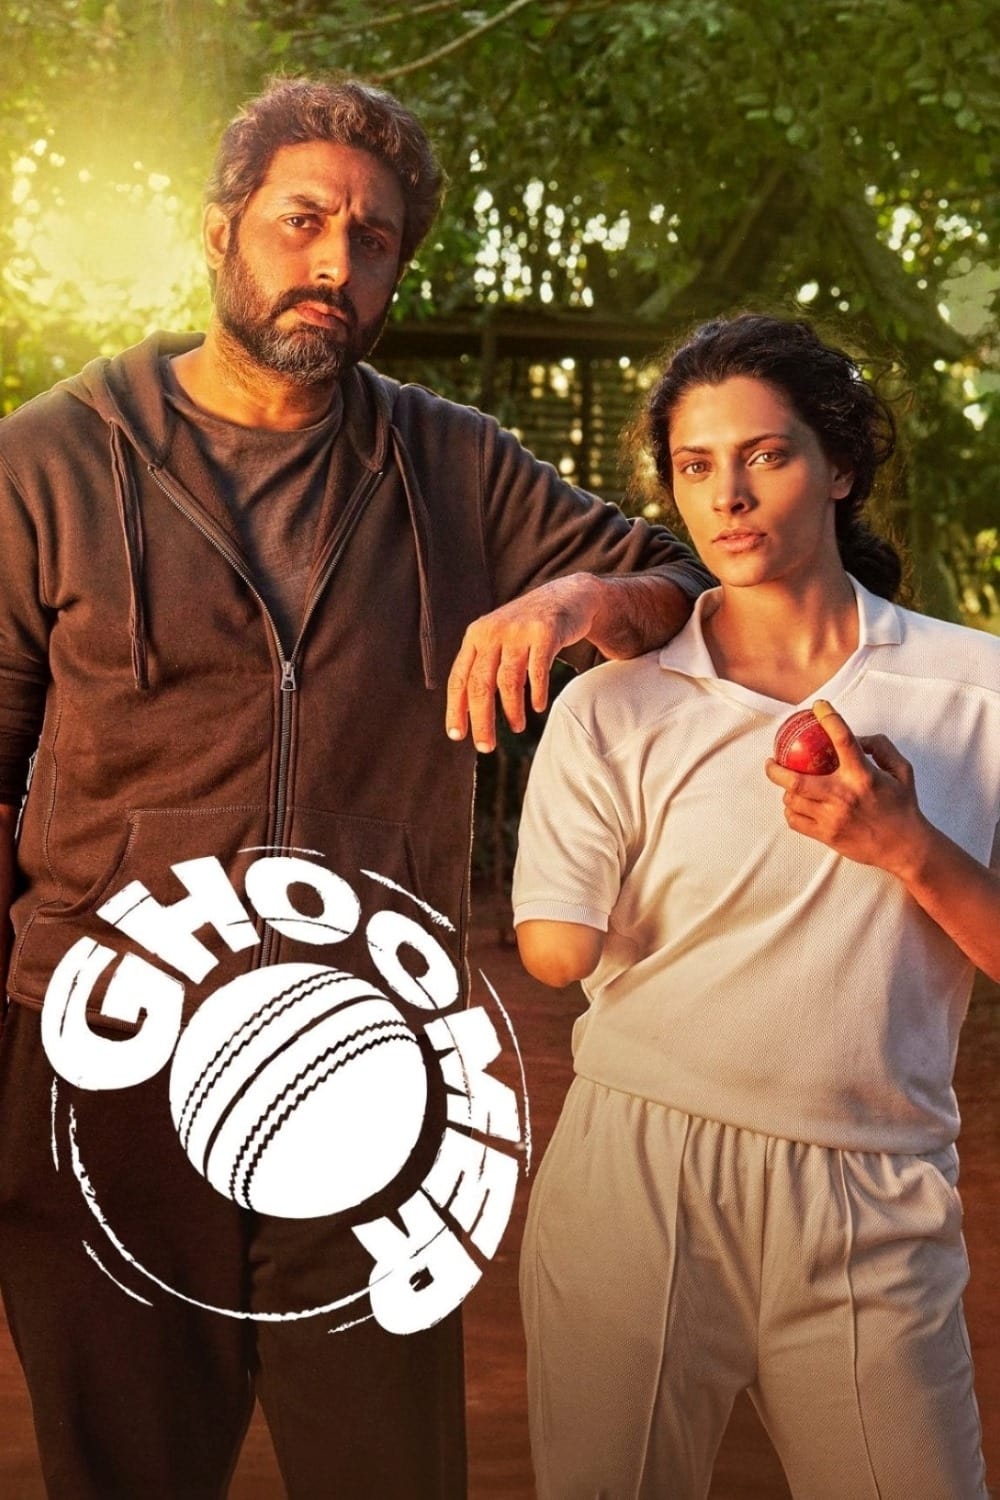 Poster for the movie "Ghoomer"